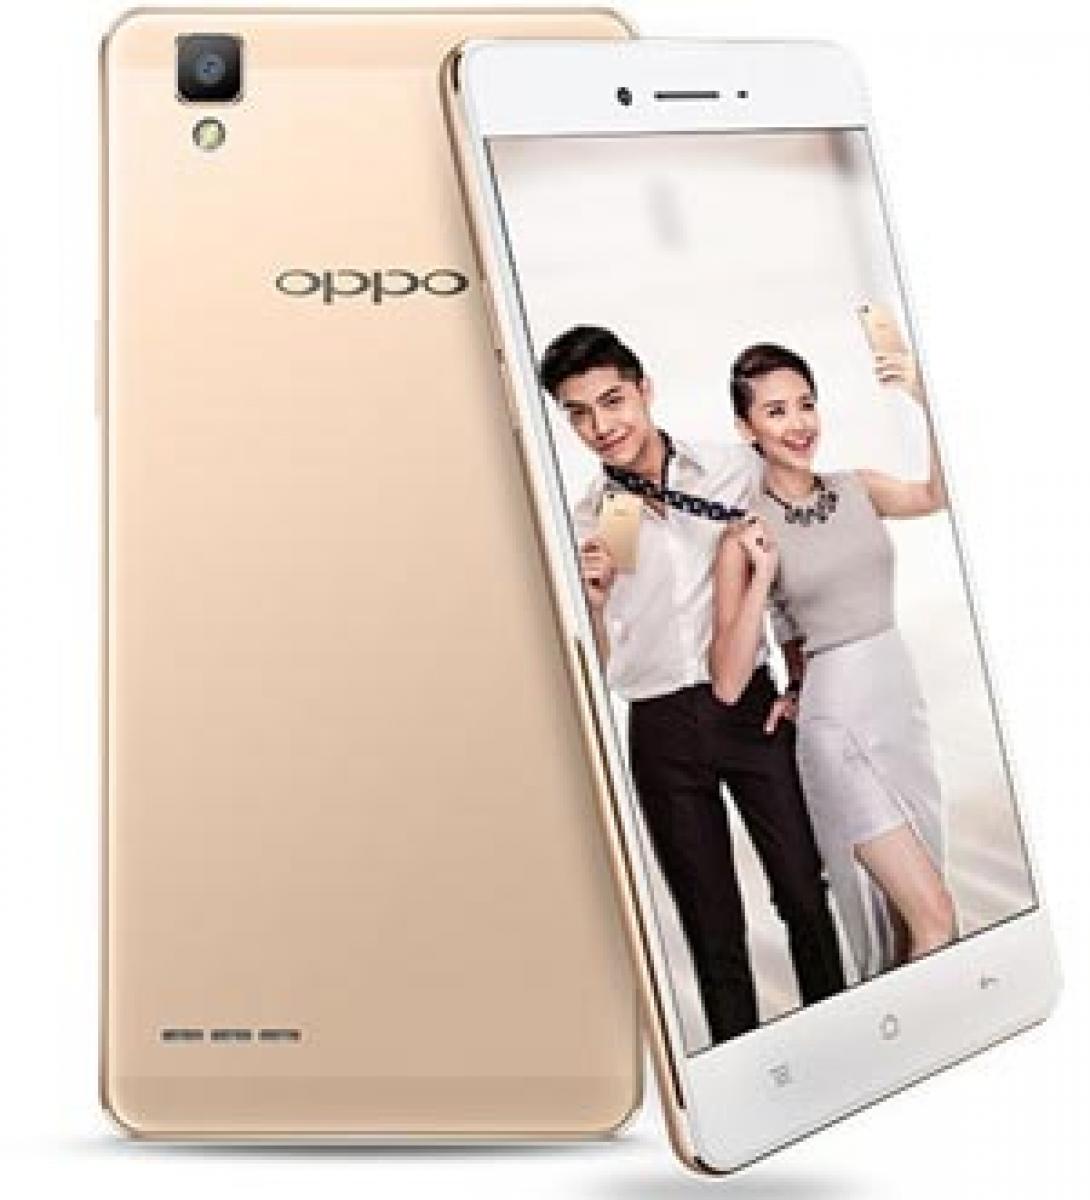 OPPO launches F1s, the new selfie expert